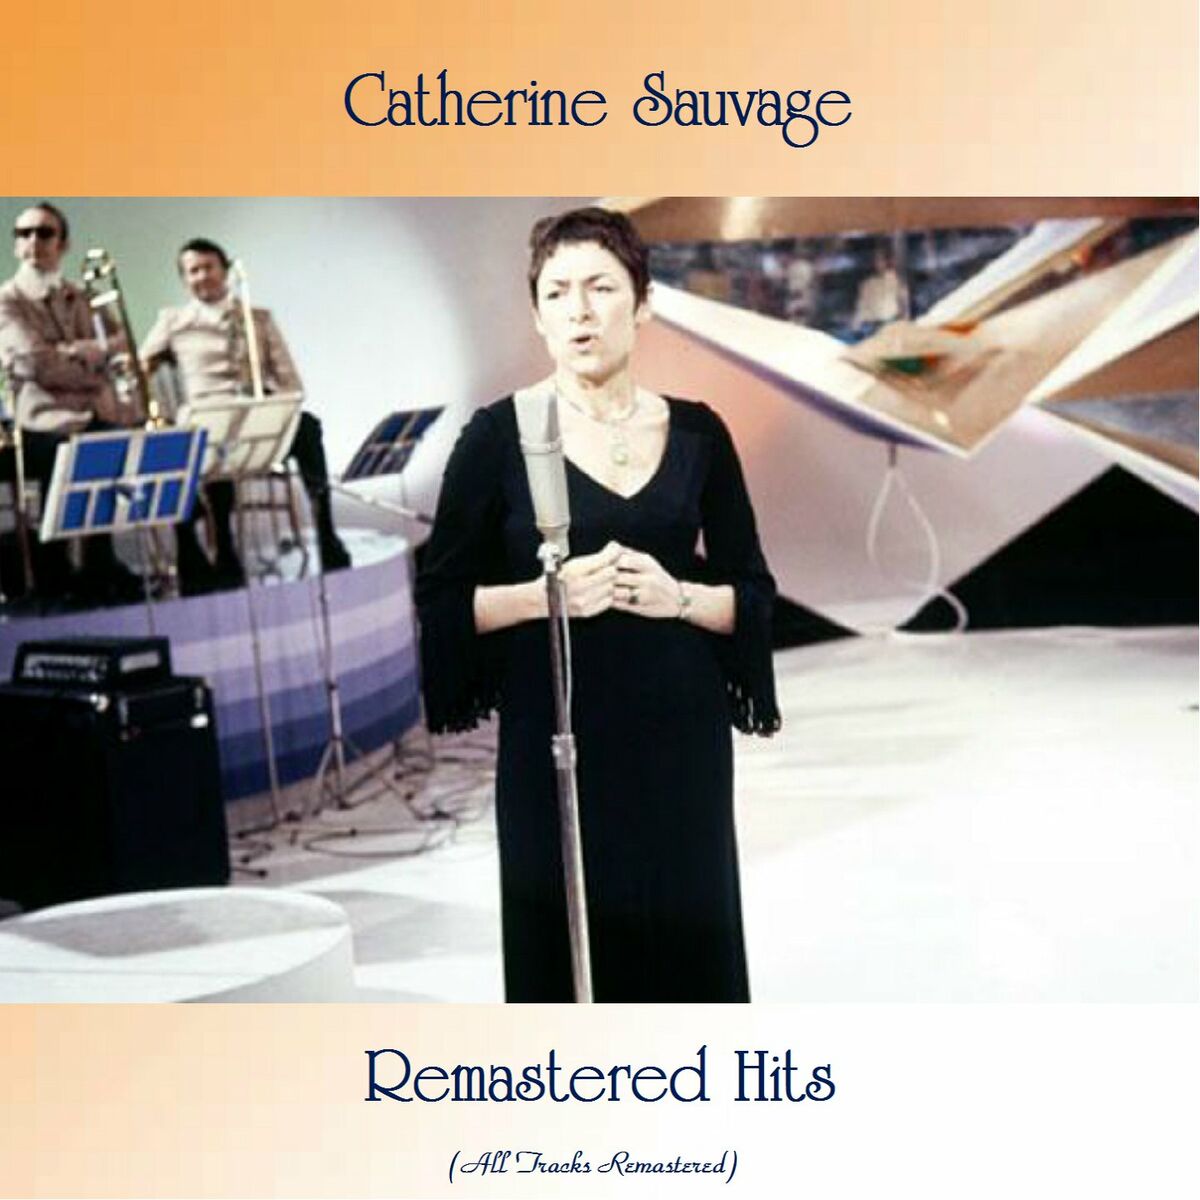 Catherine Sauvage: albums, songs, playlists | Listen on Deezer